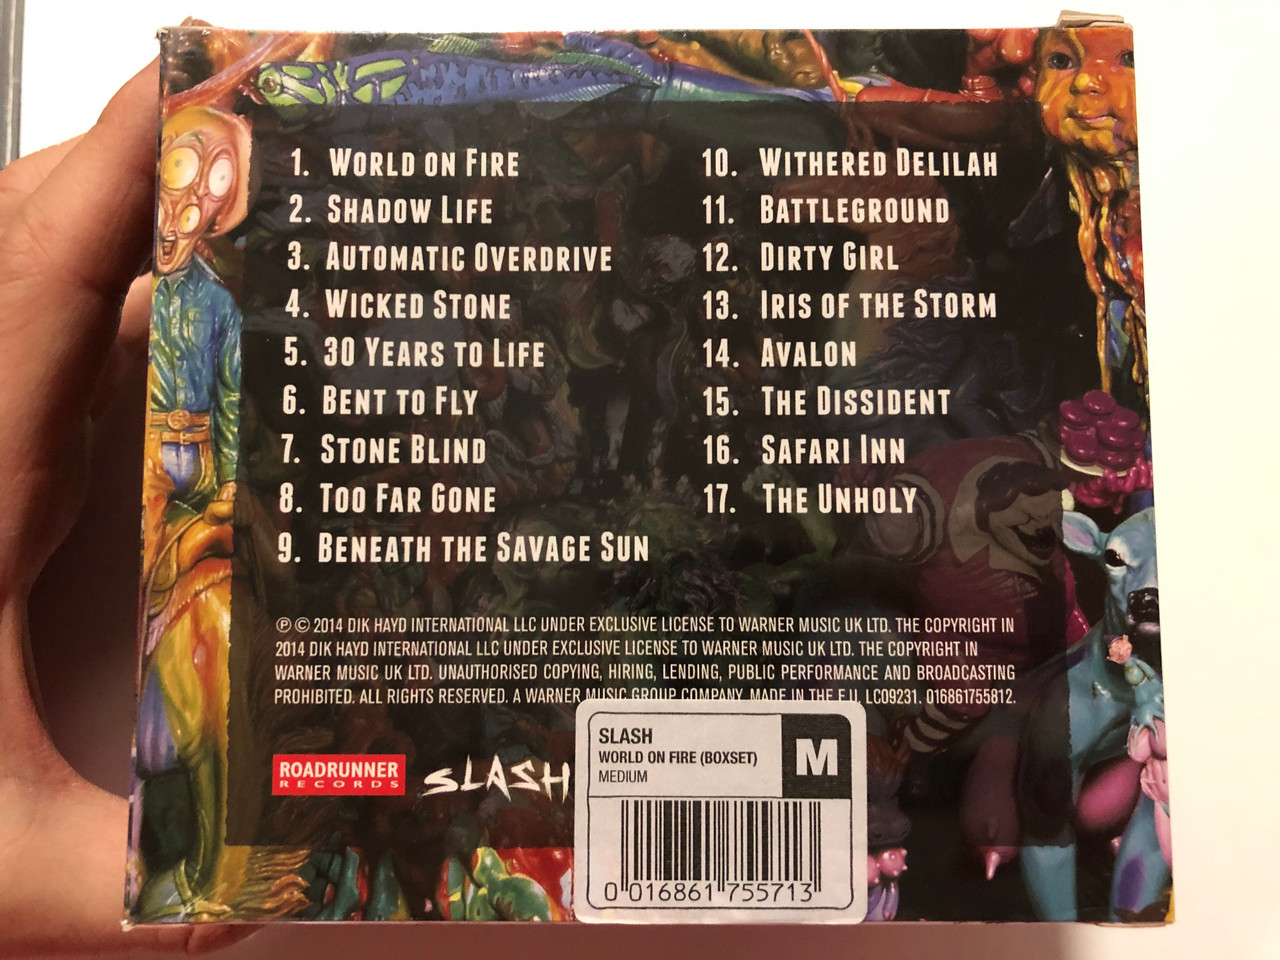 https://cdn10.bigcommerce.com/s-62bdpkt7pb/products/29809/images/177395/World_On_Fire_-_Slash_Featuring_Myles_Kennedy_And_The_Conspirators_Roadrunner_Records_Audio_CD_2014_0016861755812_2__14570.1620195018.1280.1280.JPG?c=2&_ga=2.253626624.844494949.1620659528-206537564.1620659528